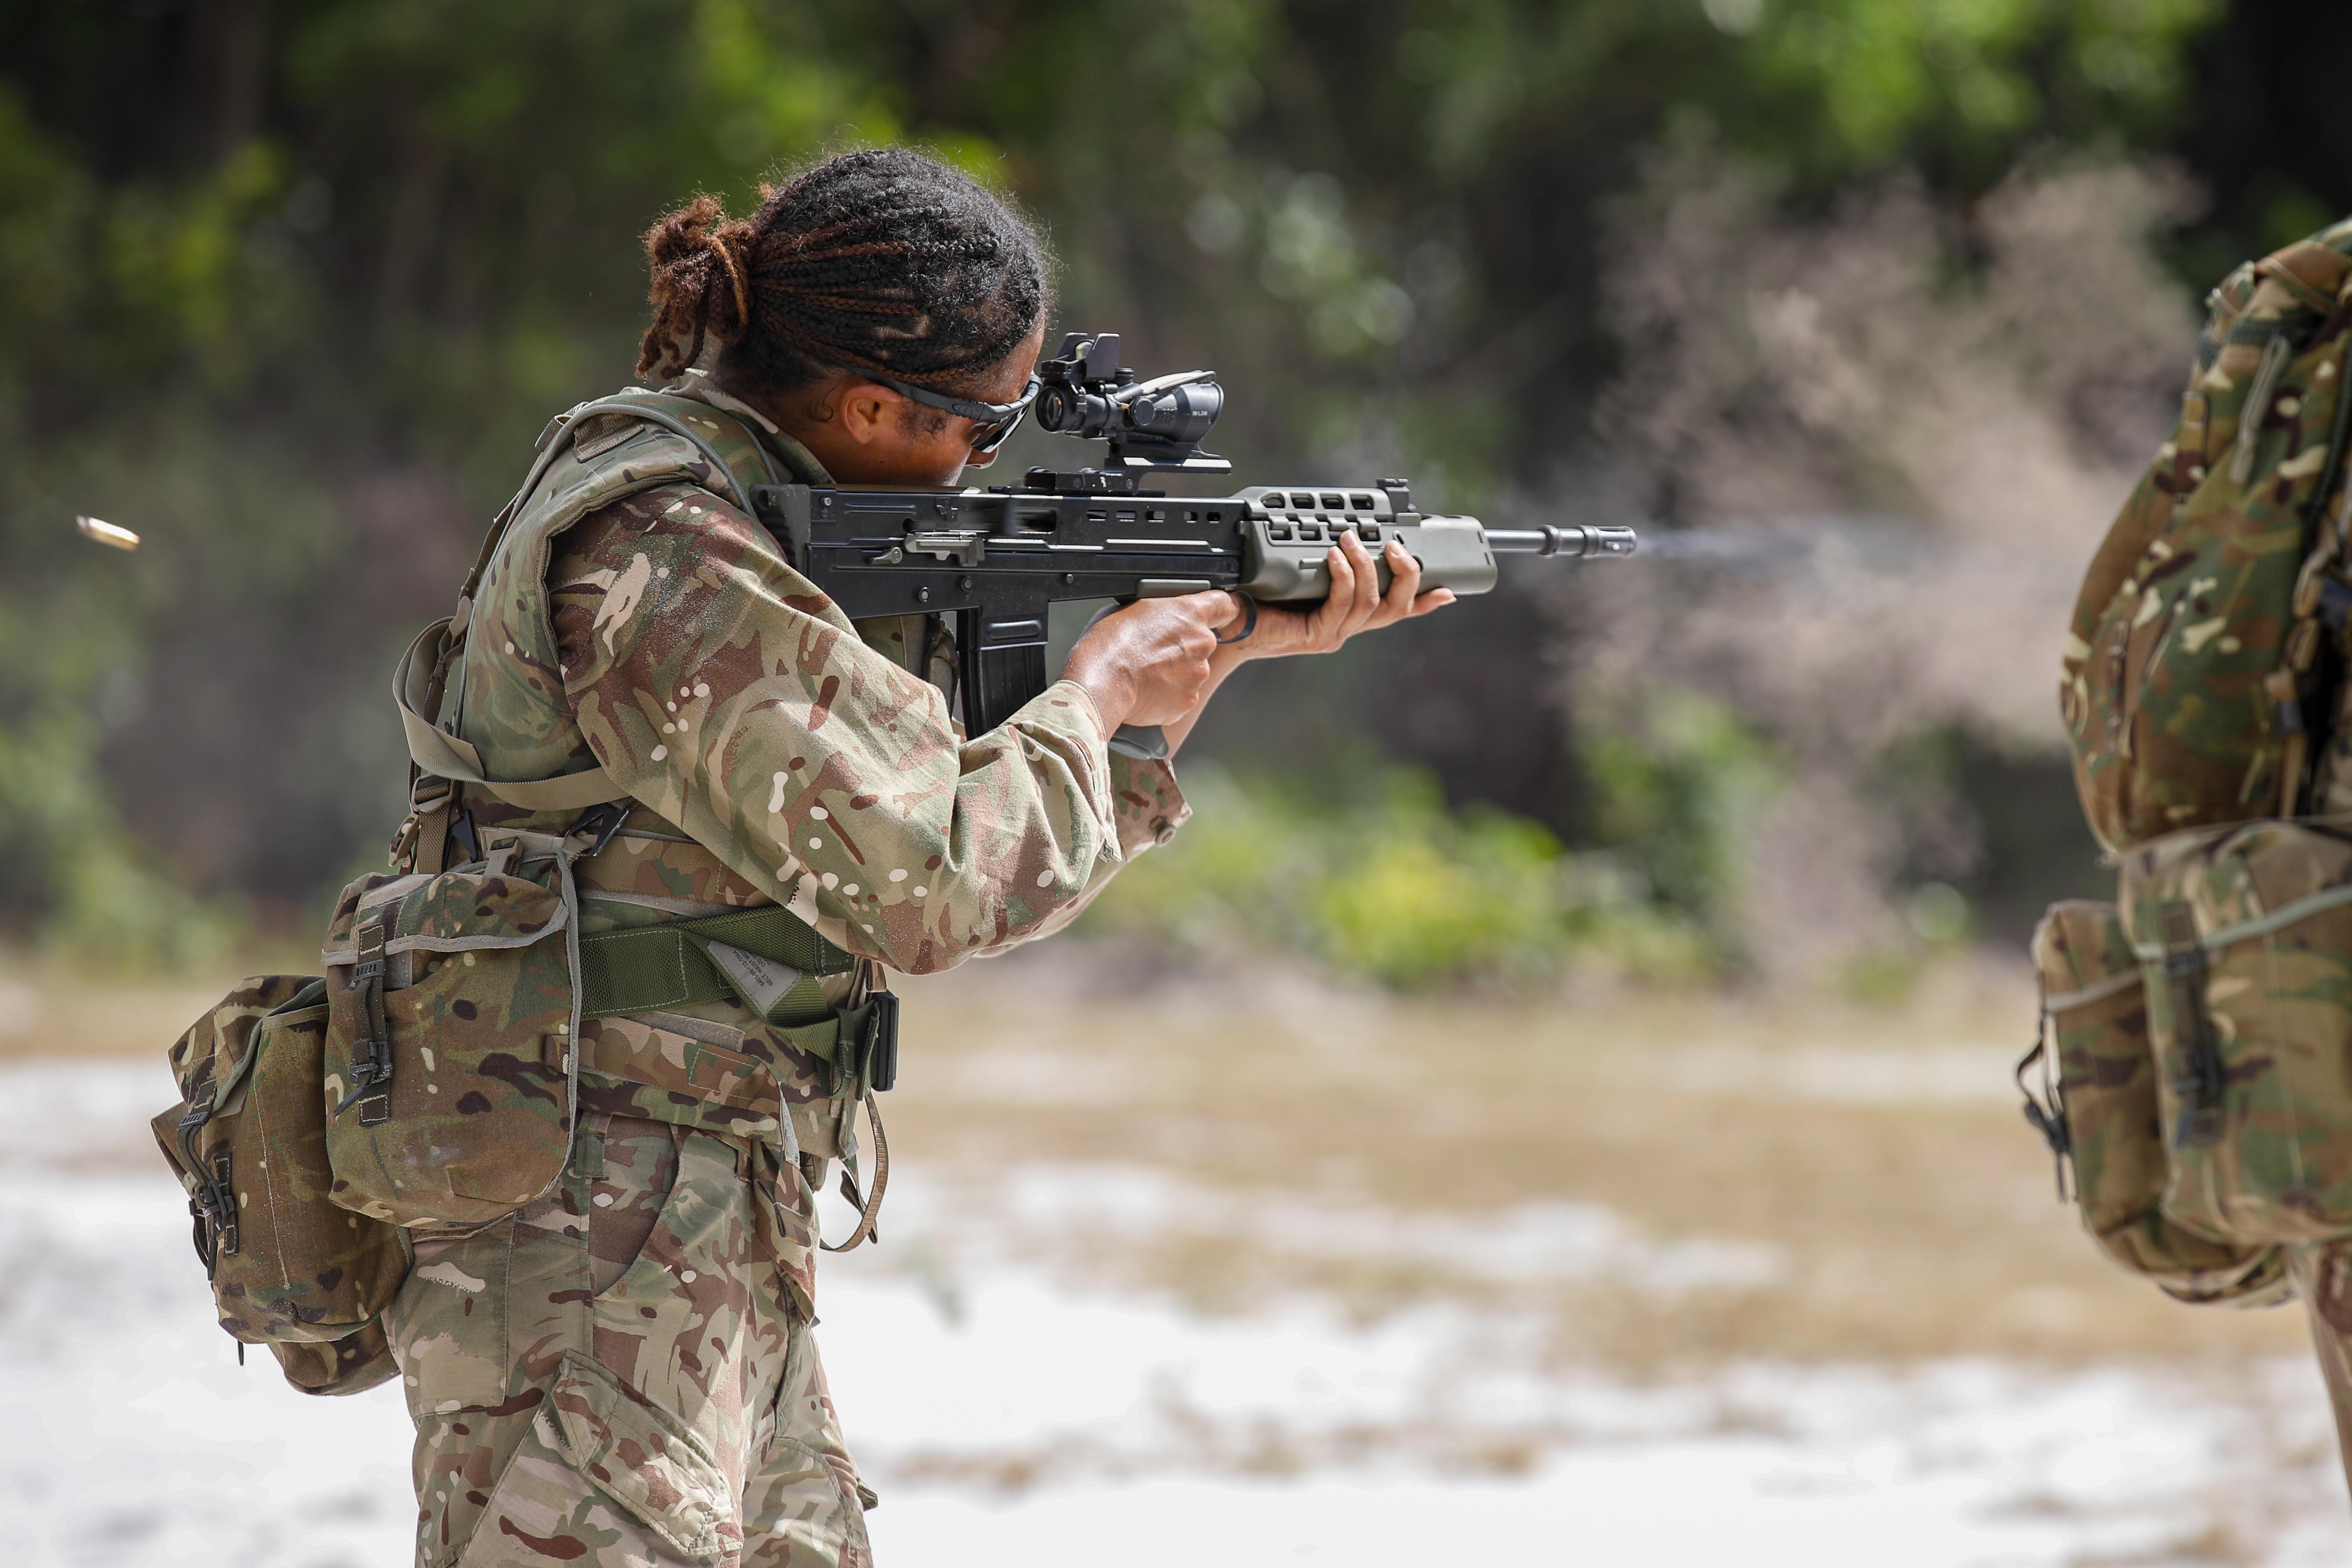 Marine Mauqueita Carter, a Turks and Caicos Islands service member, shoots at a range target at Camp Seweyo during TRADEWINDS 2023 (TW23), July 20, 2023.